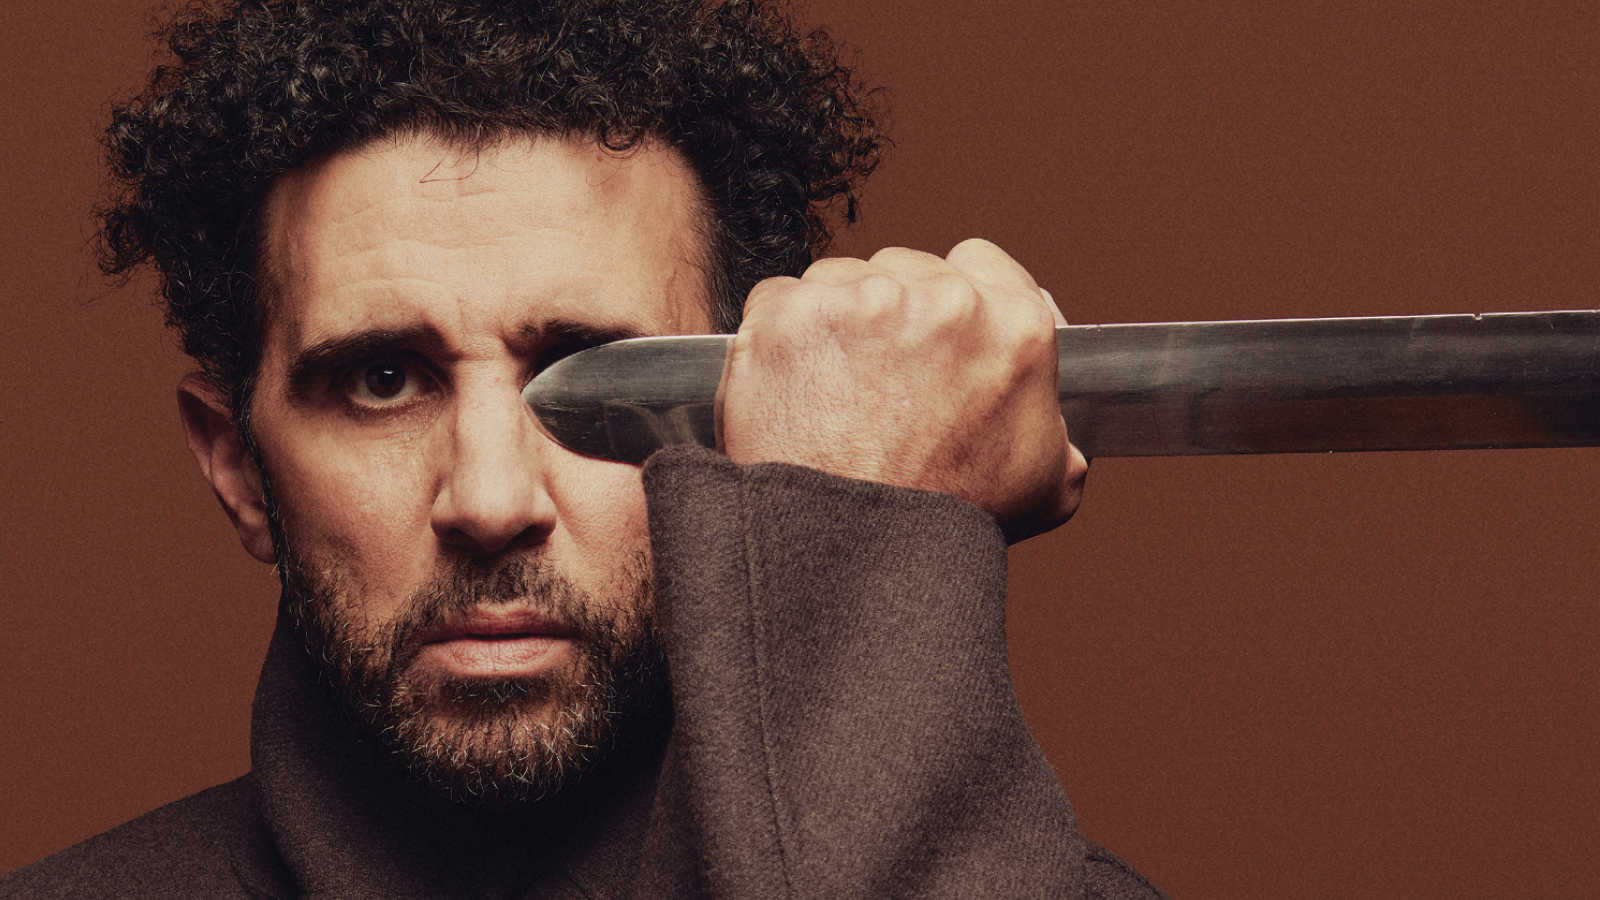 A man with stubble beard and curly hairs holding a sword blade.